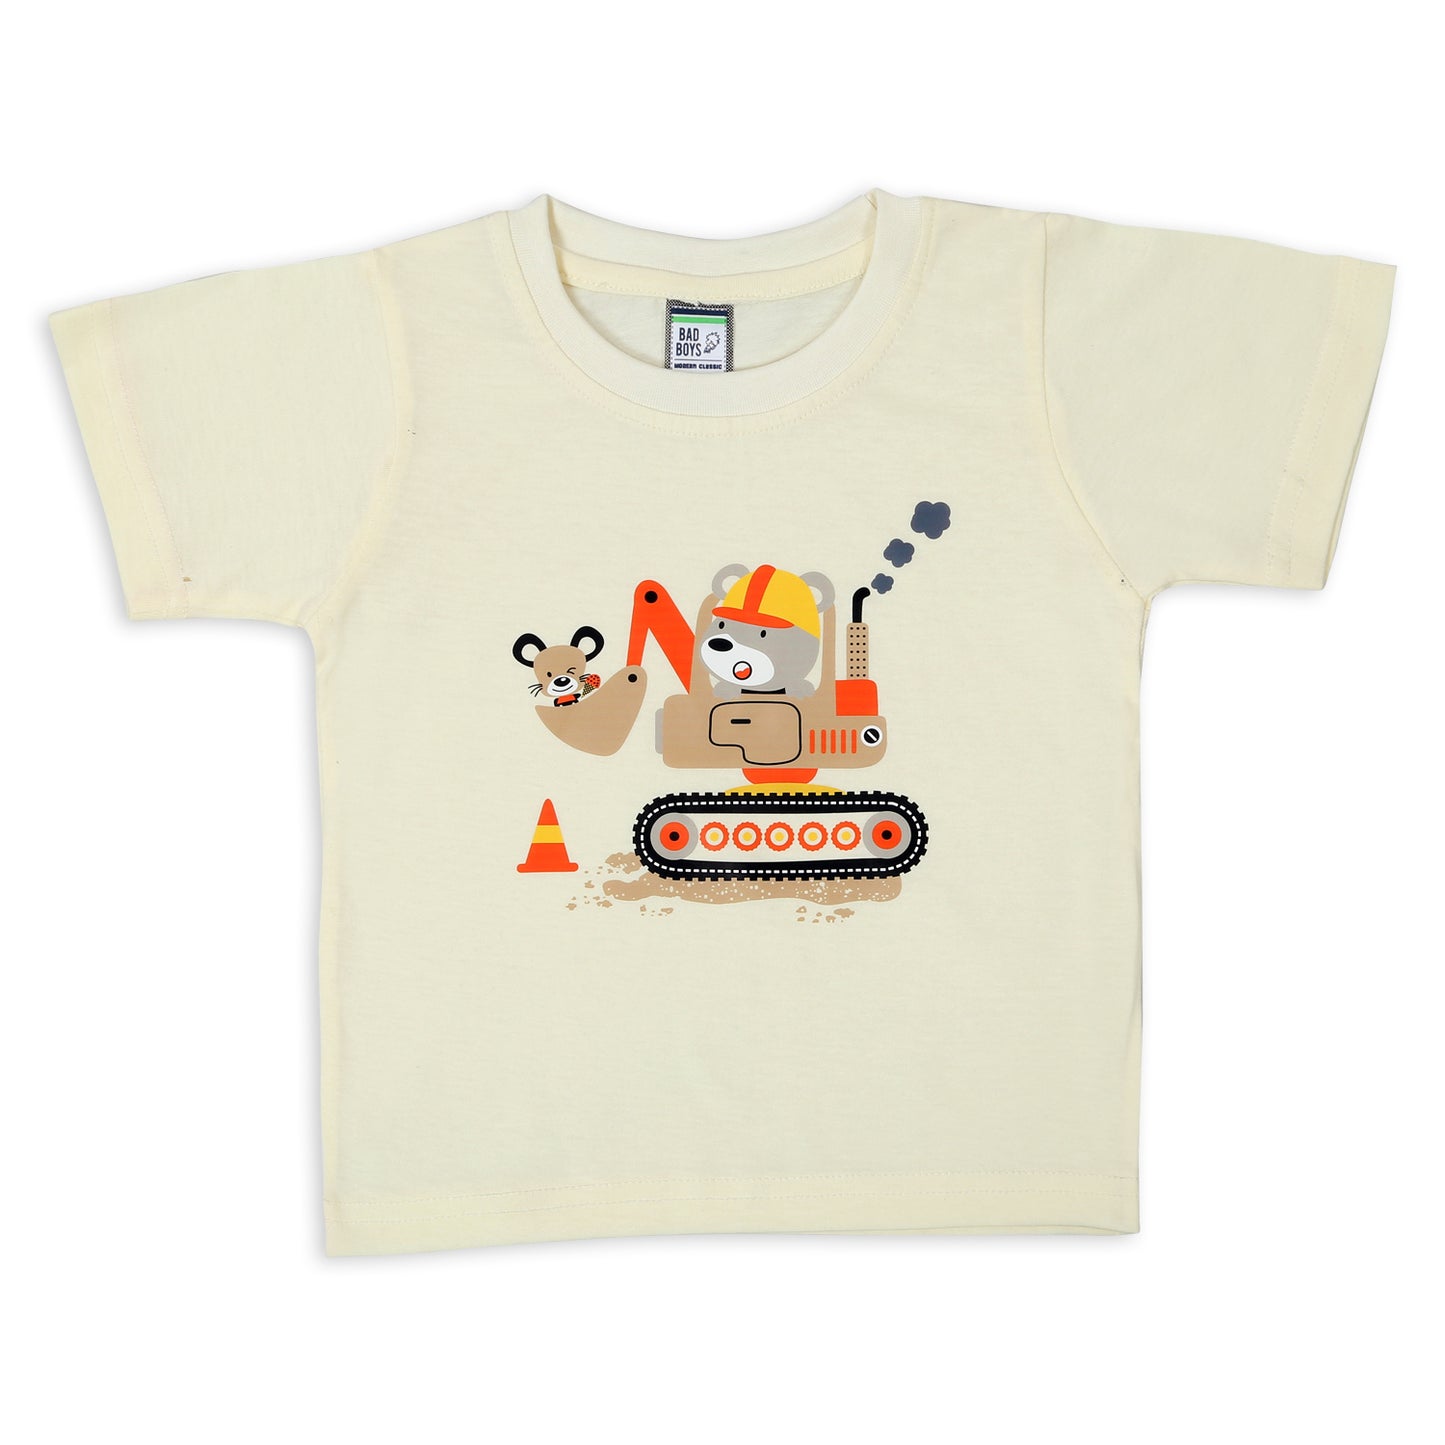 "Adorable Adventures Await: 3-Piece Set for Tiny Trendsetting Tots!"